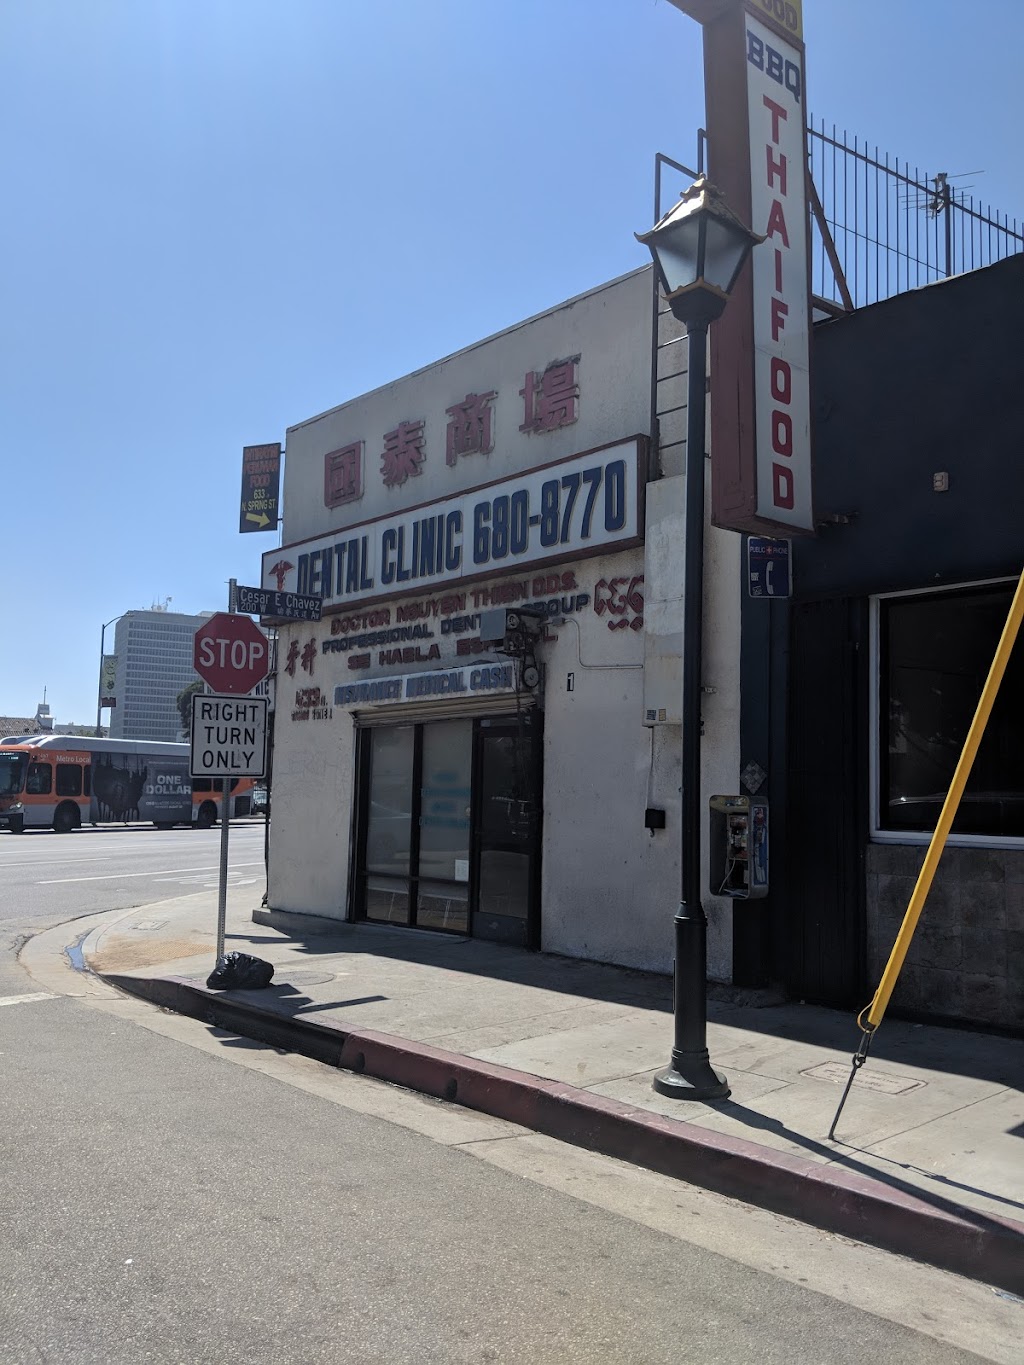 China Town Dental Clinic | 633 N Spring St # 1, Los Angeles, CA 90012, USA | Phone: (213) 680-8770